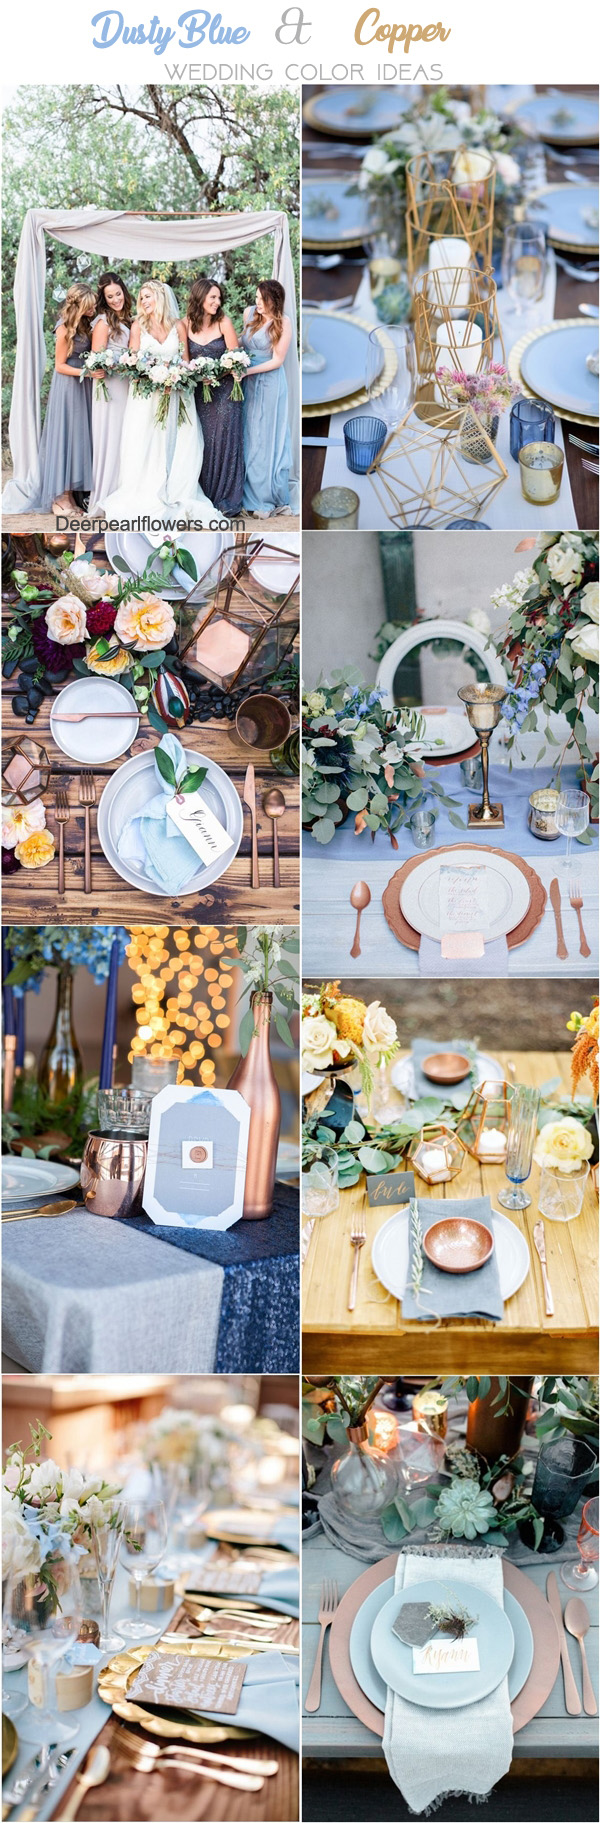 copper and dusty blue wedding color ideas